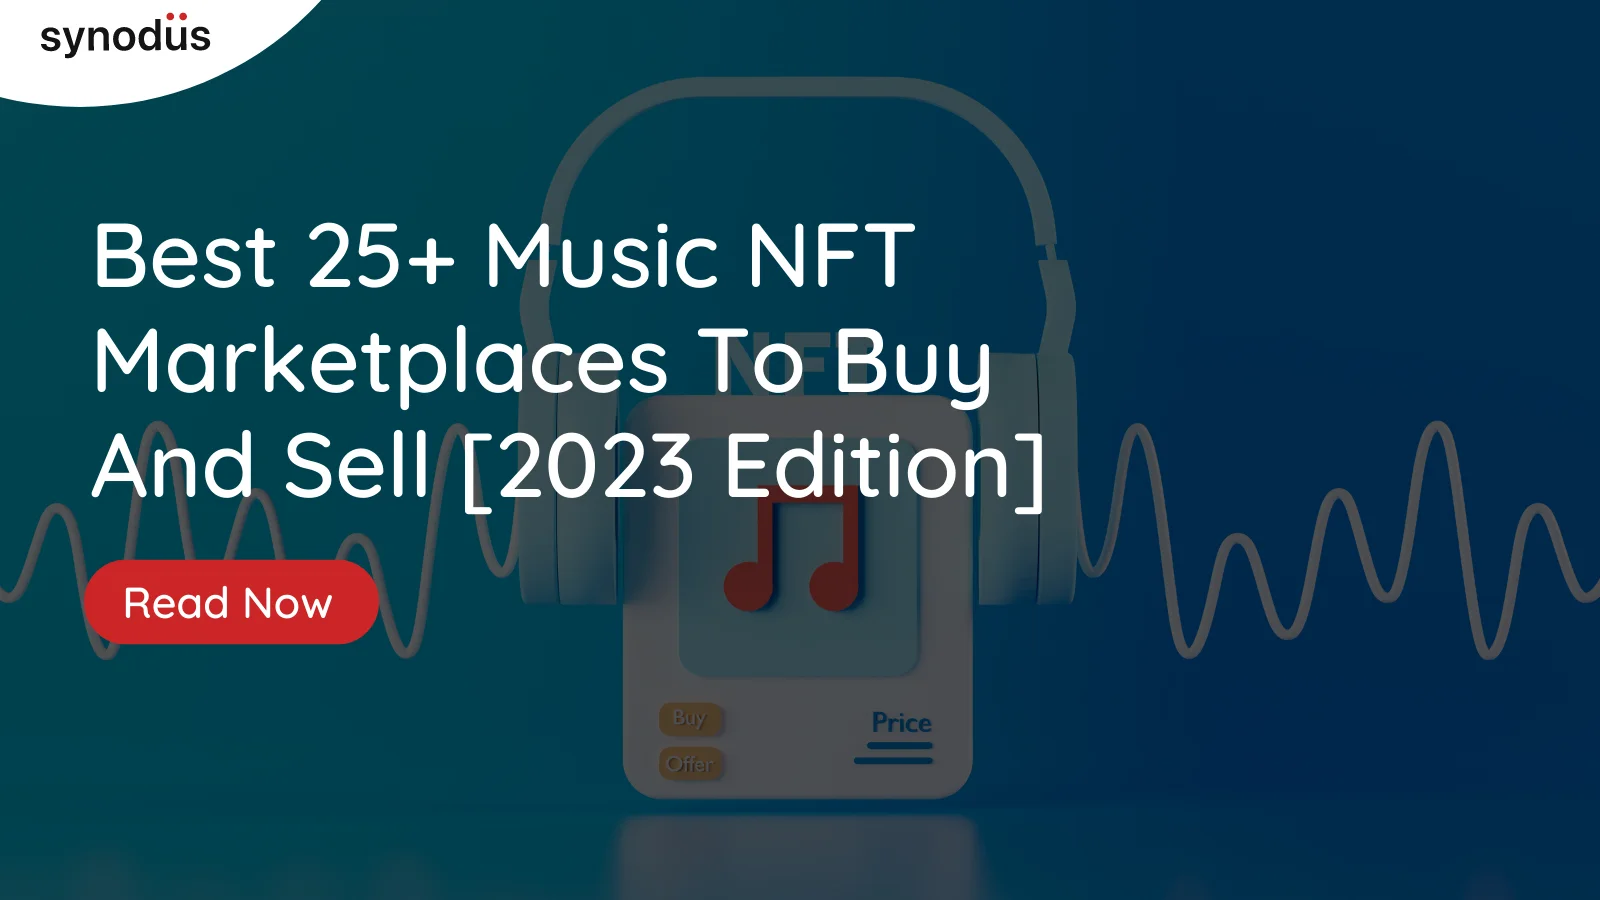 Best 25+ Music NFT Marketplaces To Buy And Sell [2023 edition]